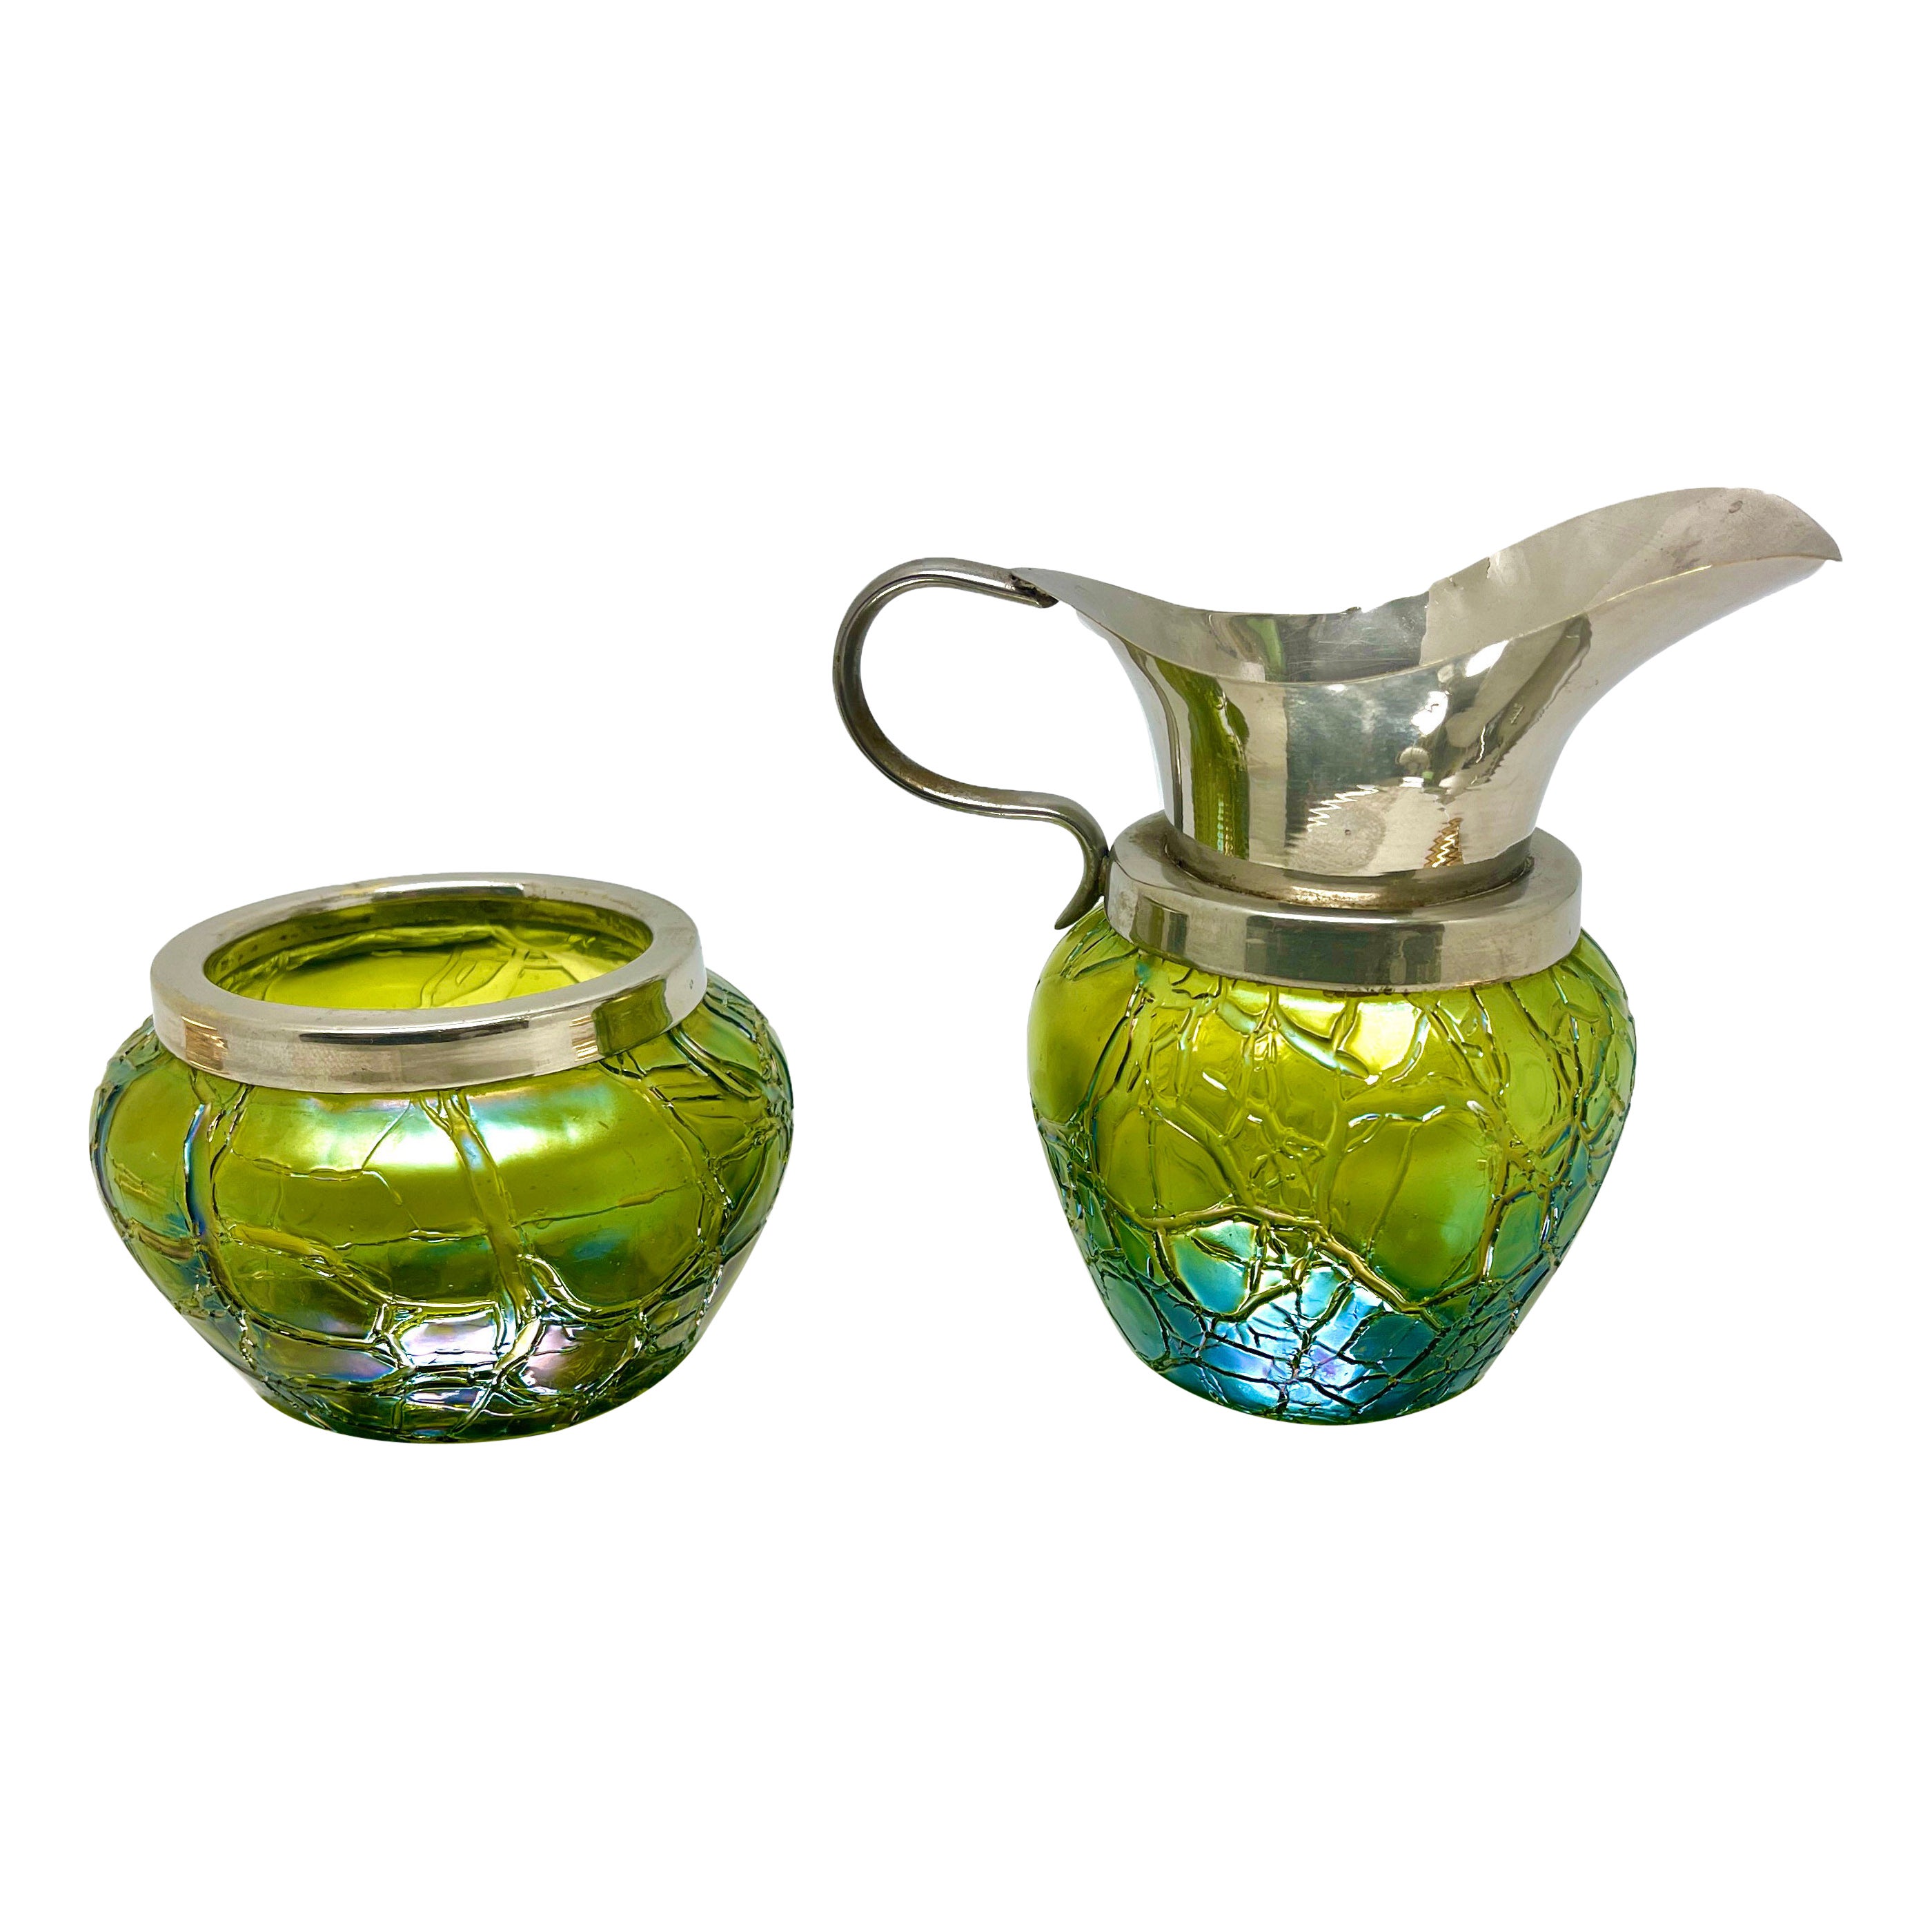 Loetz Art Nouveau Cream Jug and Sugar Bowl with Details of Irradiated Glass For Sale